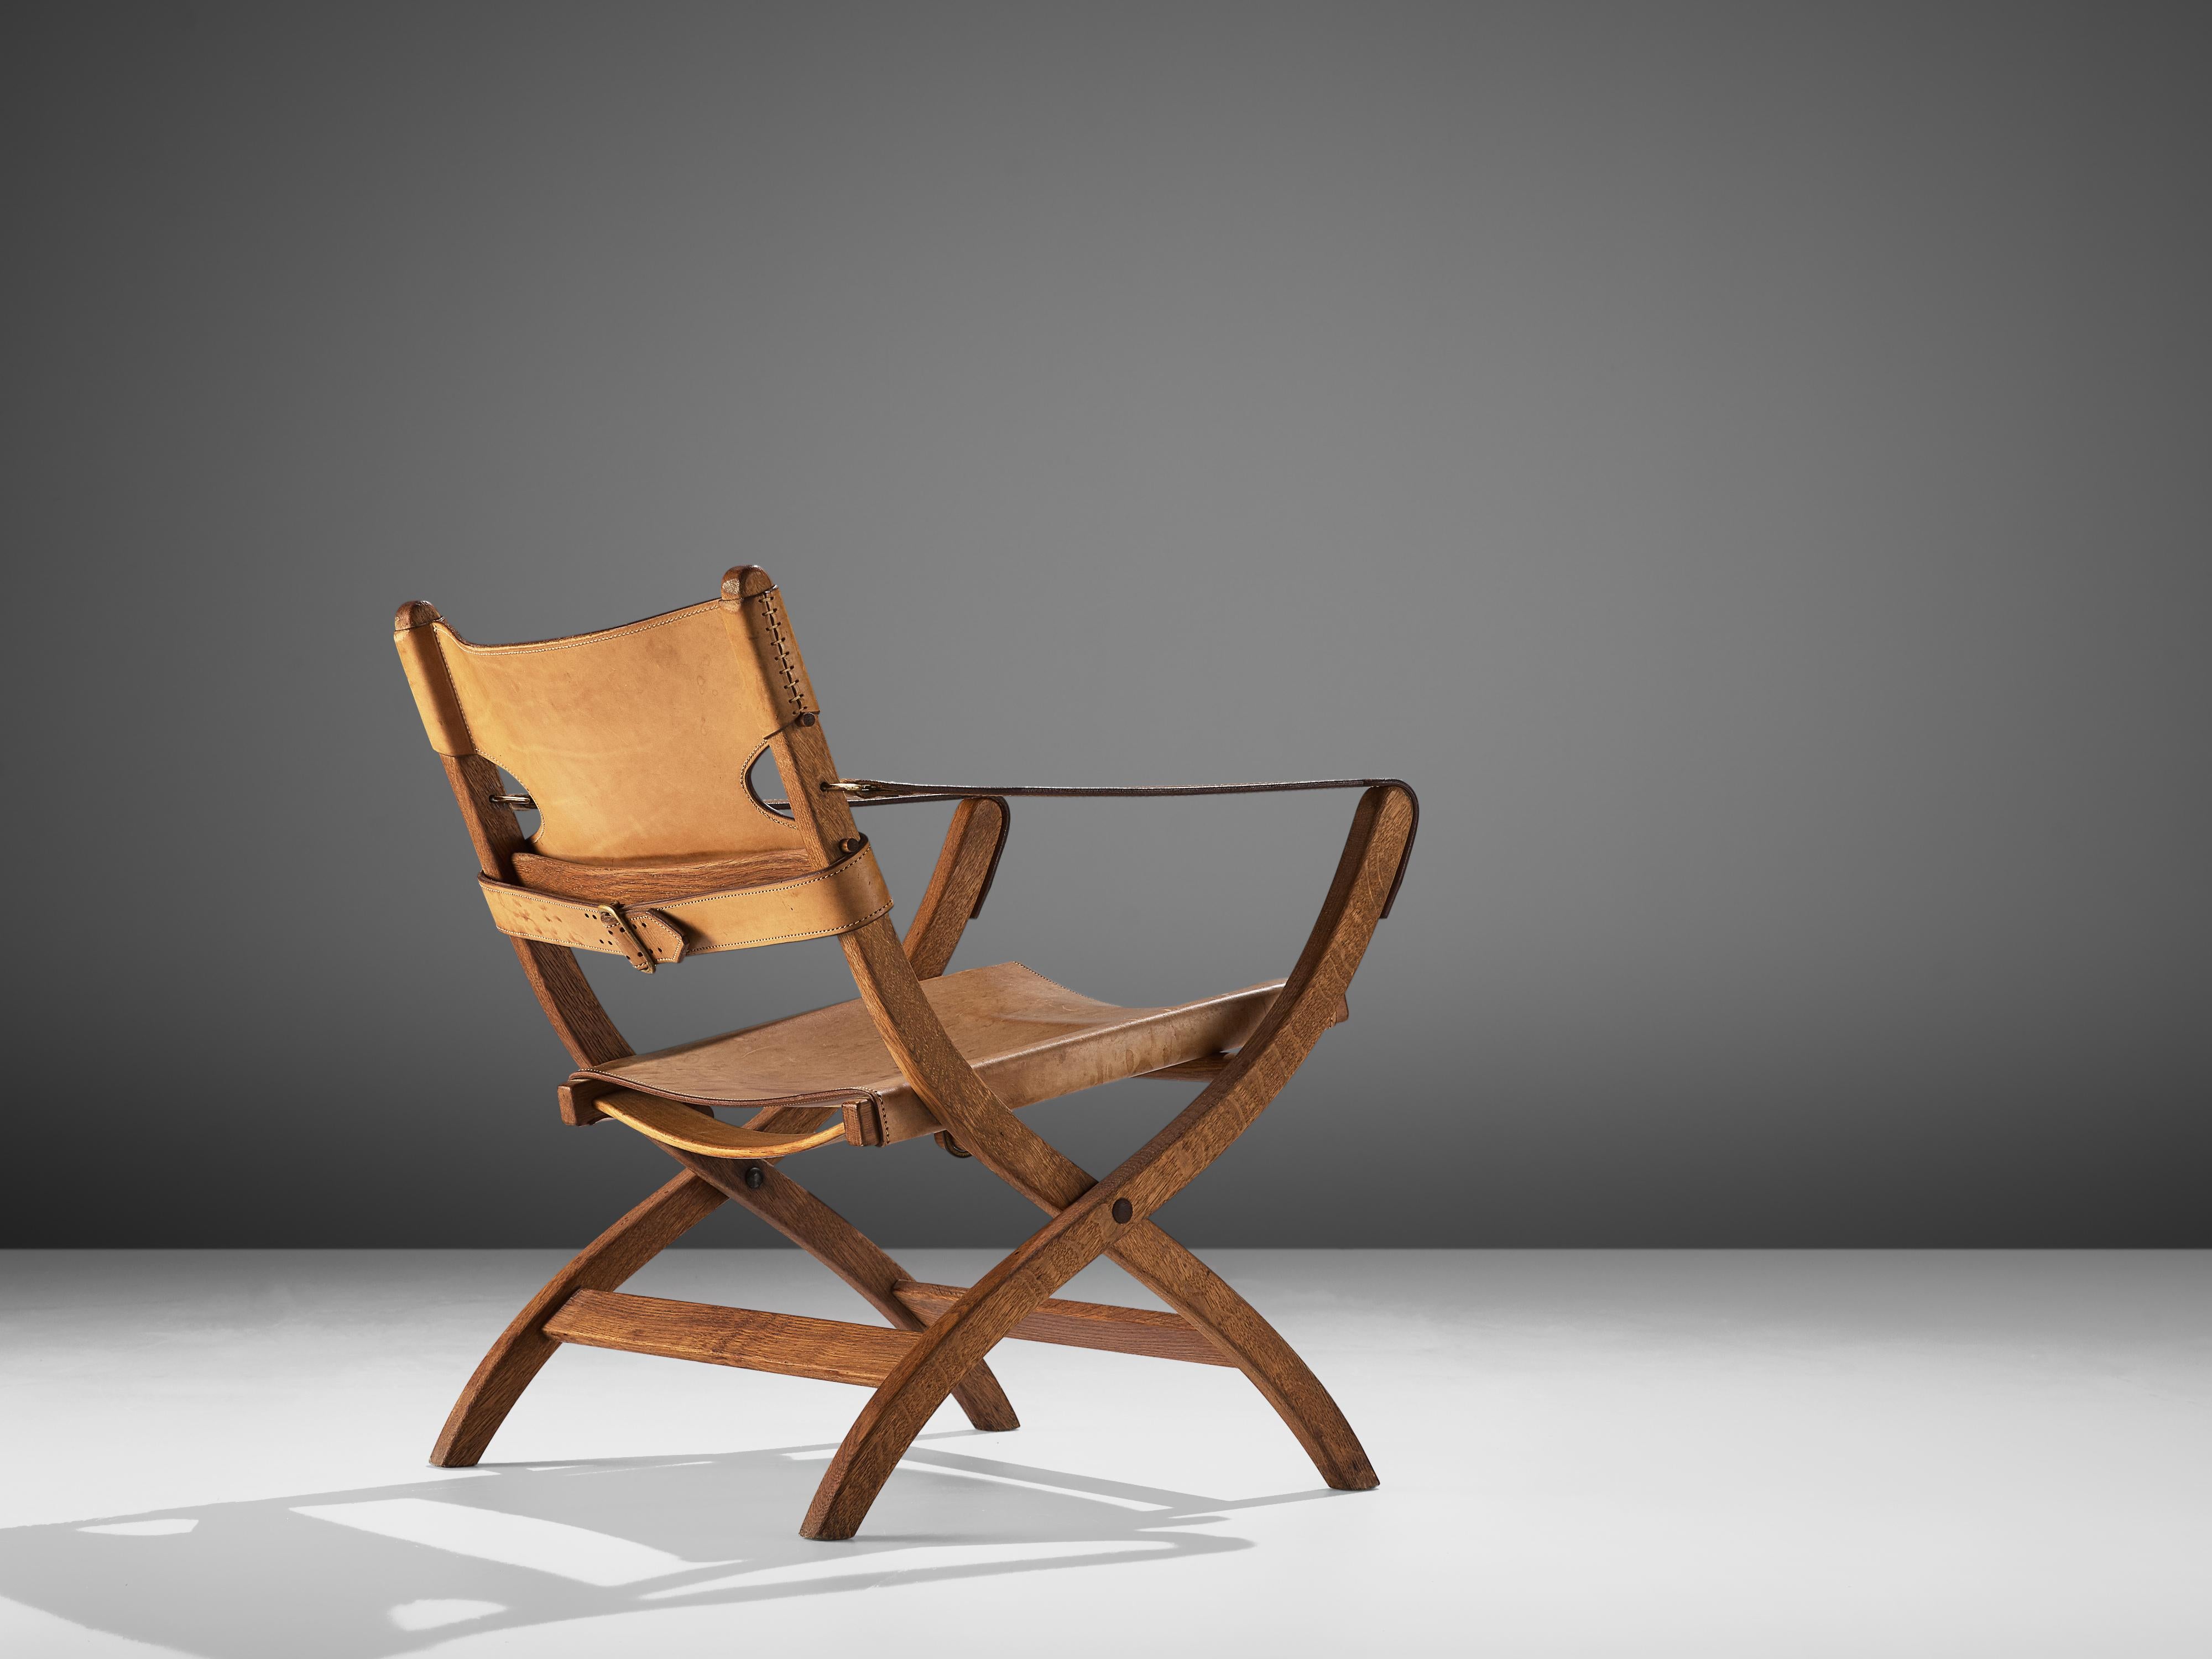 Poul Hundevad, foldable armchair, oak, leather, Denmark, 1950s.

This folding chair has X-shaped legs, and is inspired on ancient Egyptian thrones and chairs. The frame is from solid oak. The seating and back are made of cognac colored to beige